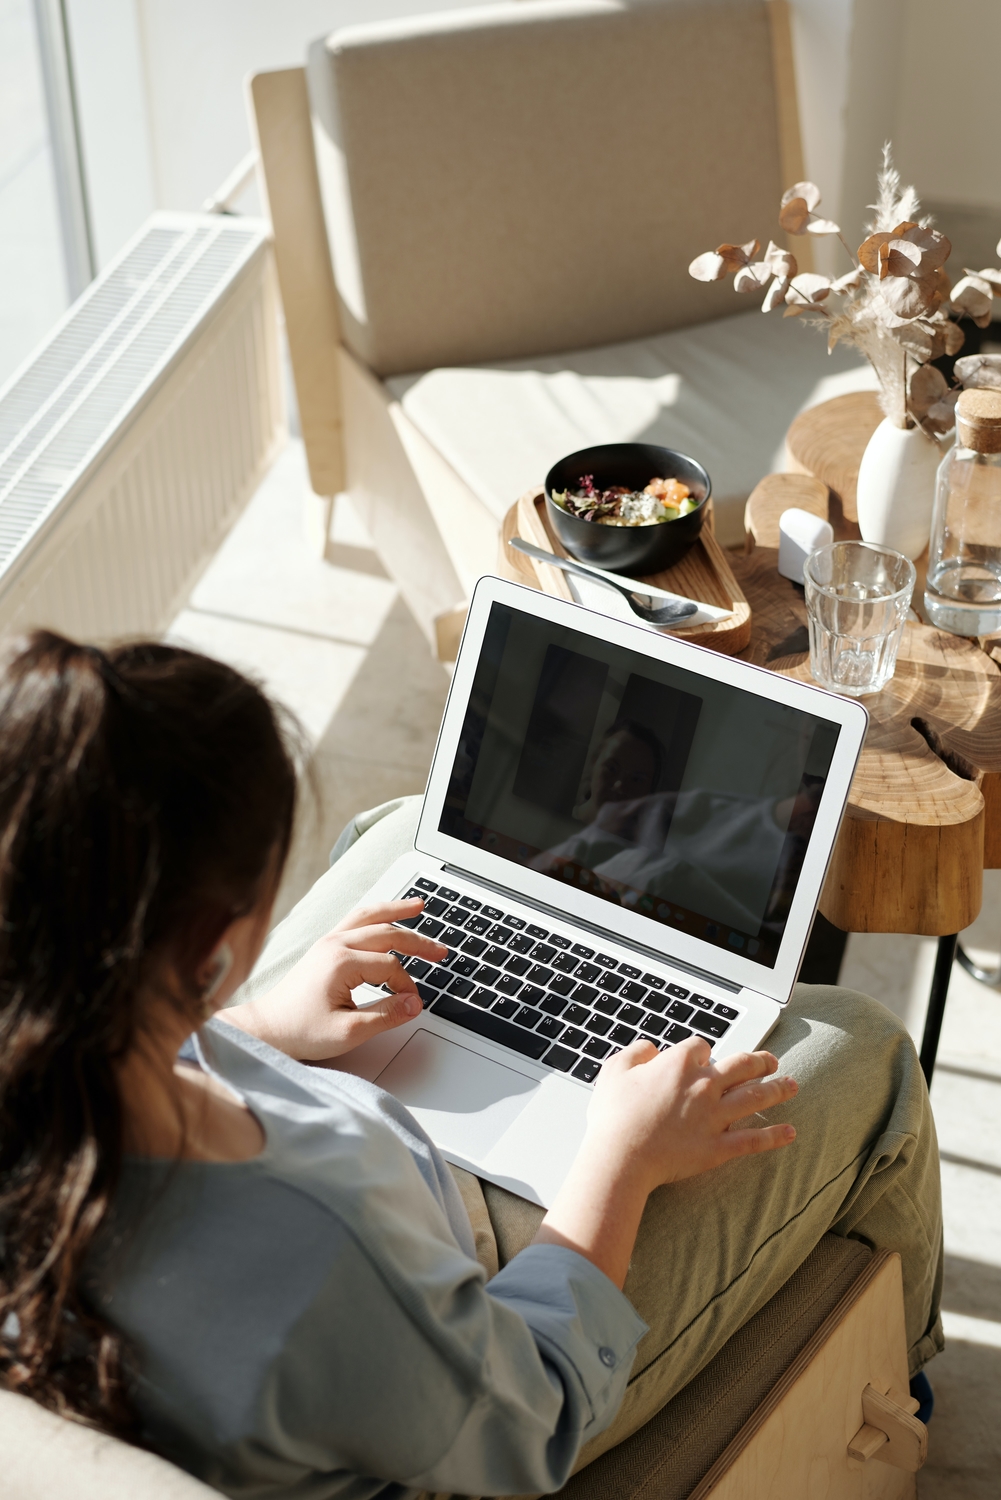 6 Tips for Making Work From Home More Productive